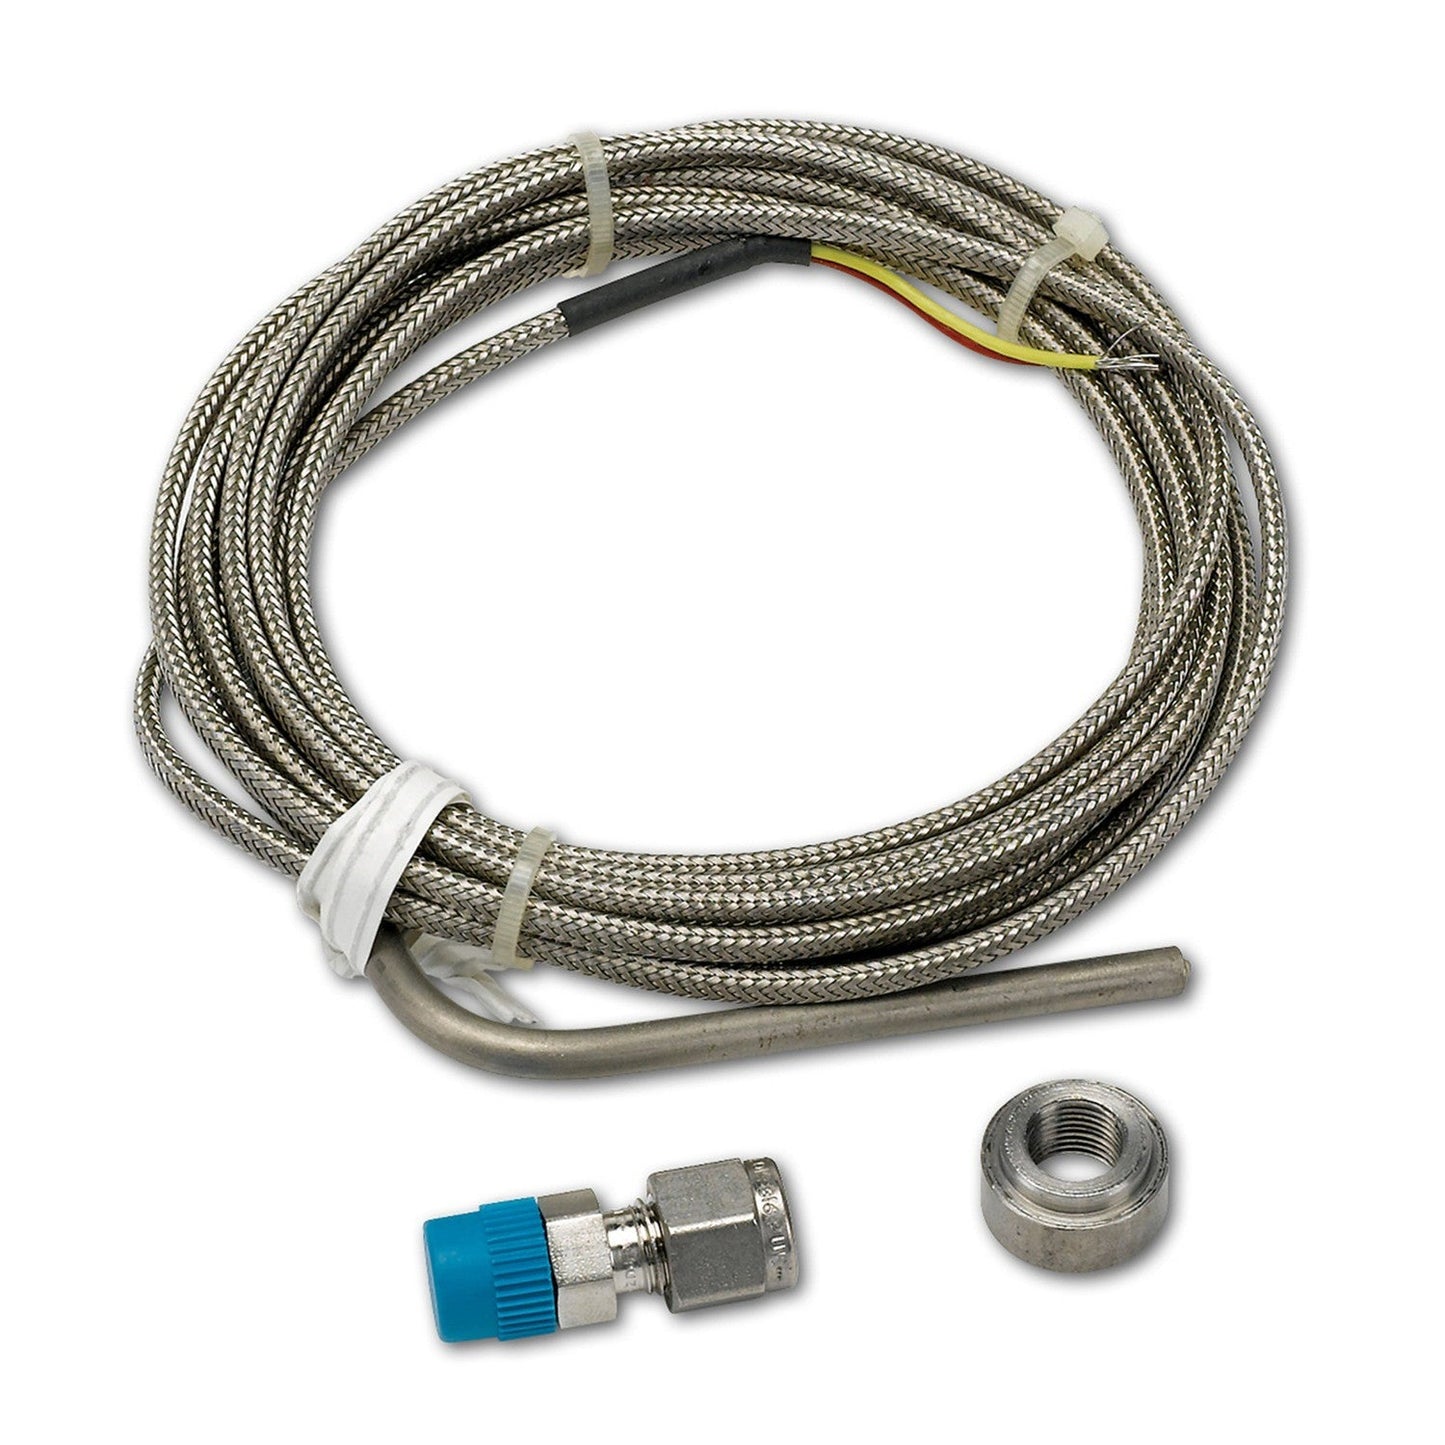 AutoMeter - THERMOCOUPLE KIT, TYPE K, 3/16" DIA, OPEN TIP, 10 FT, INCL. STAINLESS COMP. & WELD BOSS (5244)